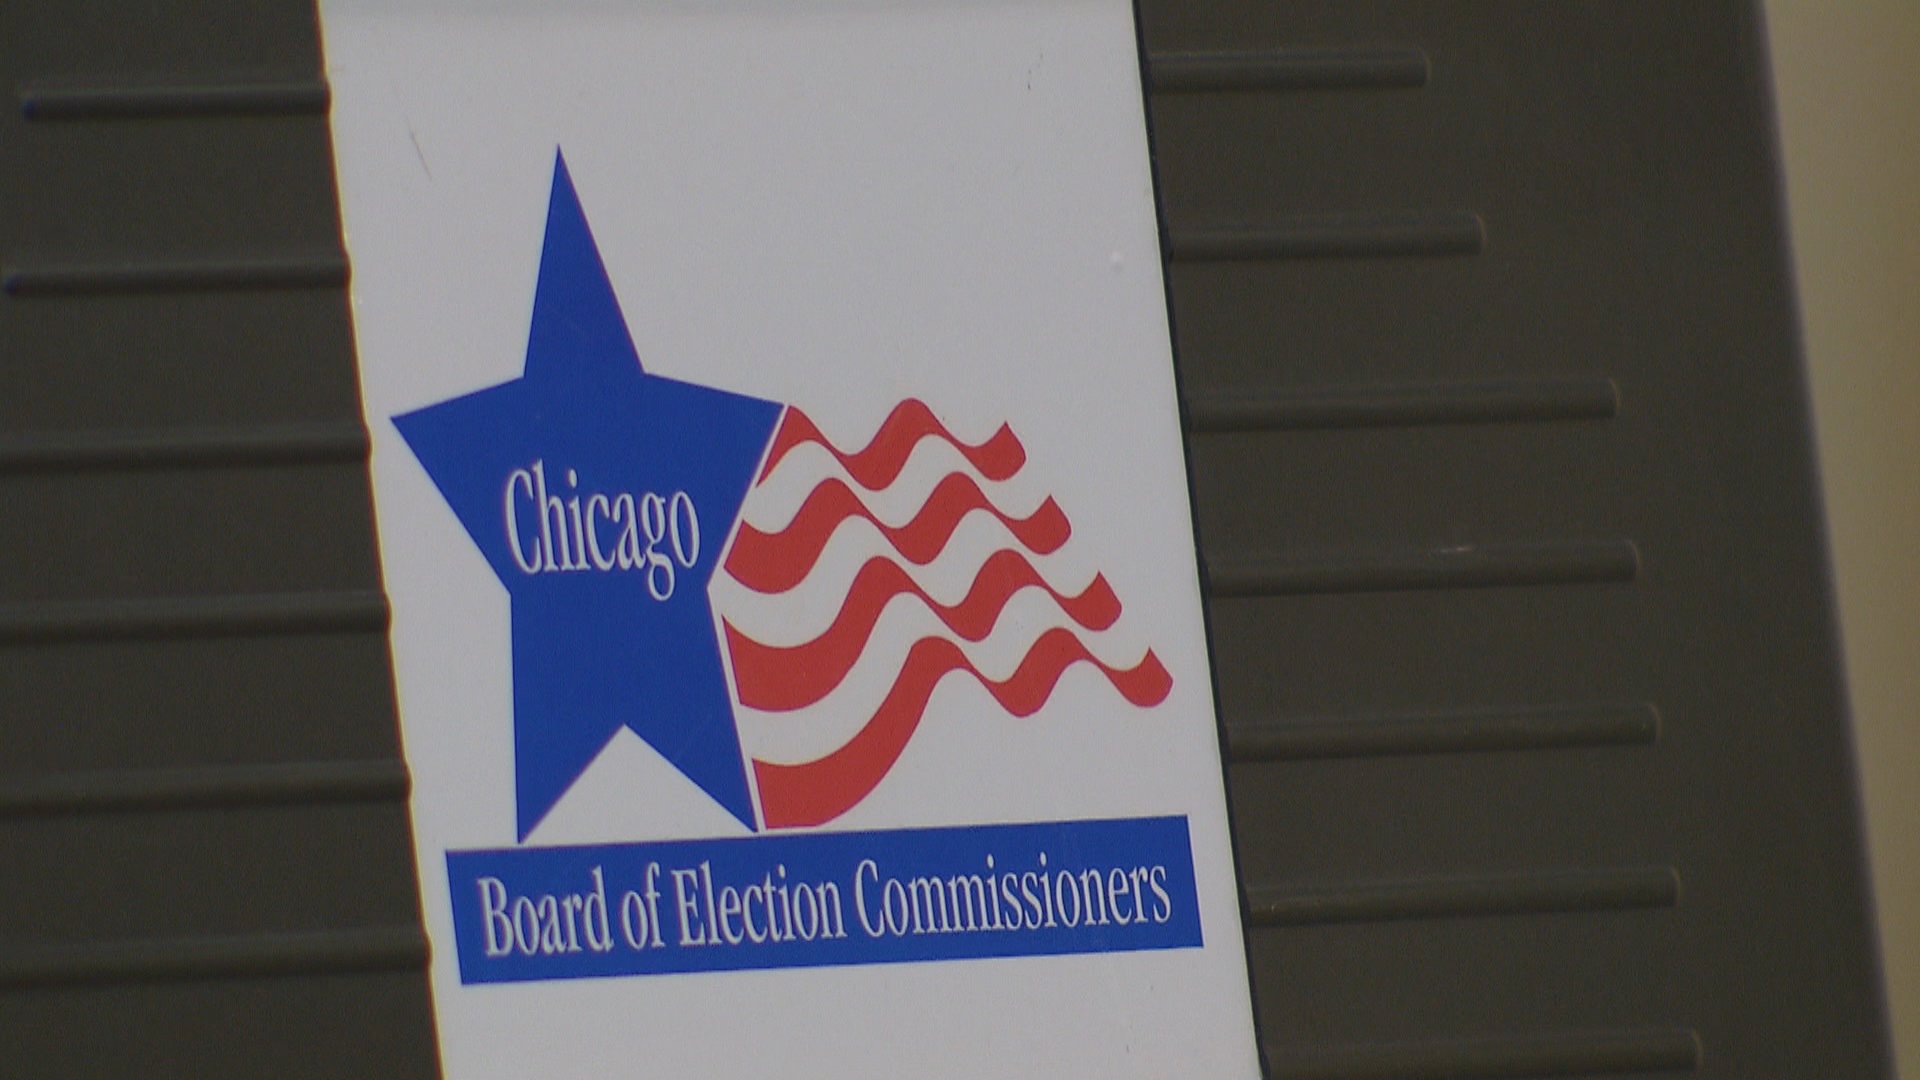 Early Voting for Illinois Primary Election Less Than a Month Away